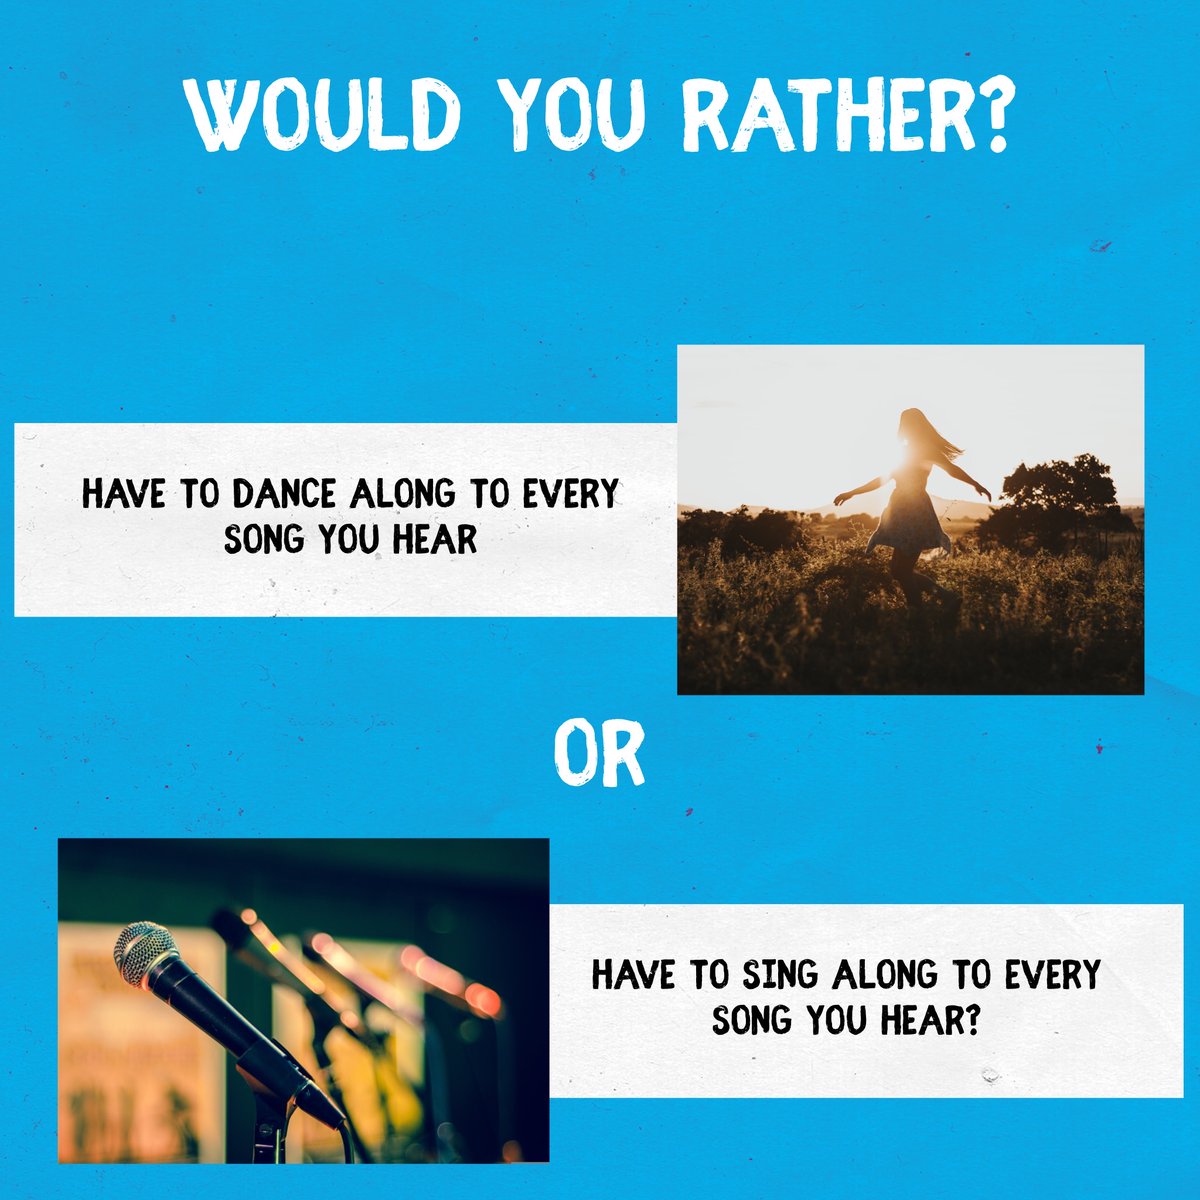 Which would you prefer? Let us know in the comments below! #acop #americanconsumeropinion #surveysformoney #wouldyourather ##wouldyouratherquestions #sing #dance #music